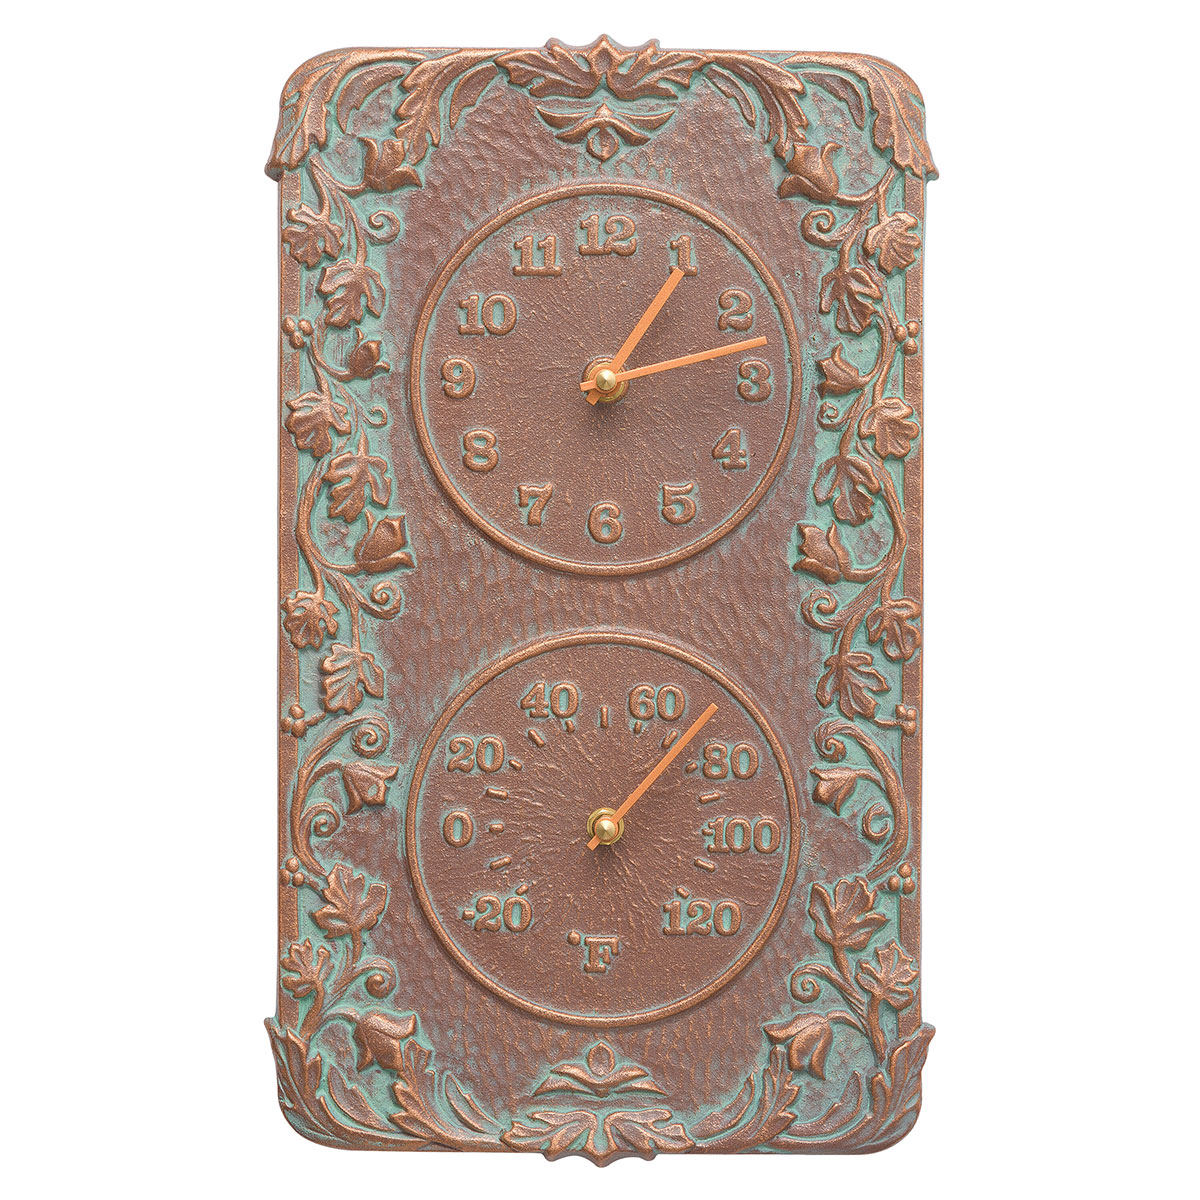 Ivy Silhouette Indoor/Outdoor Wall Thermometer - Copper Verdigris